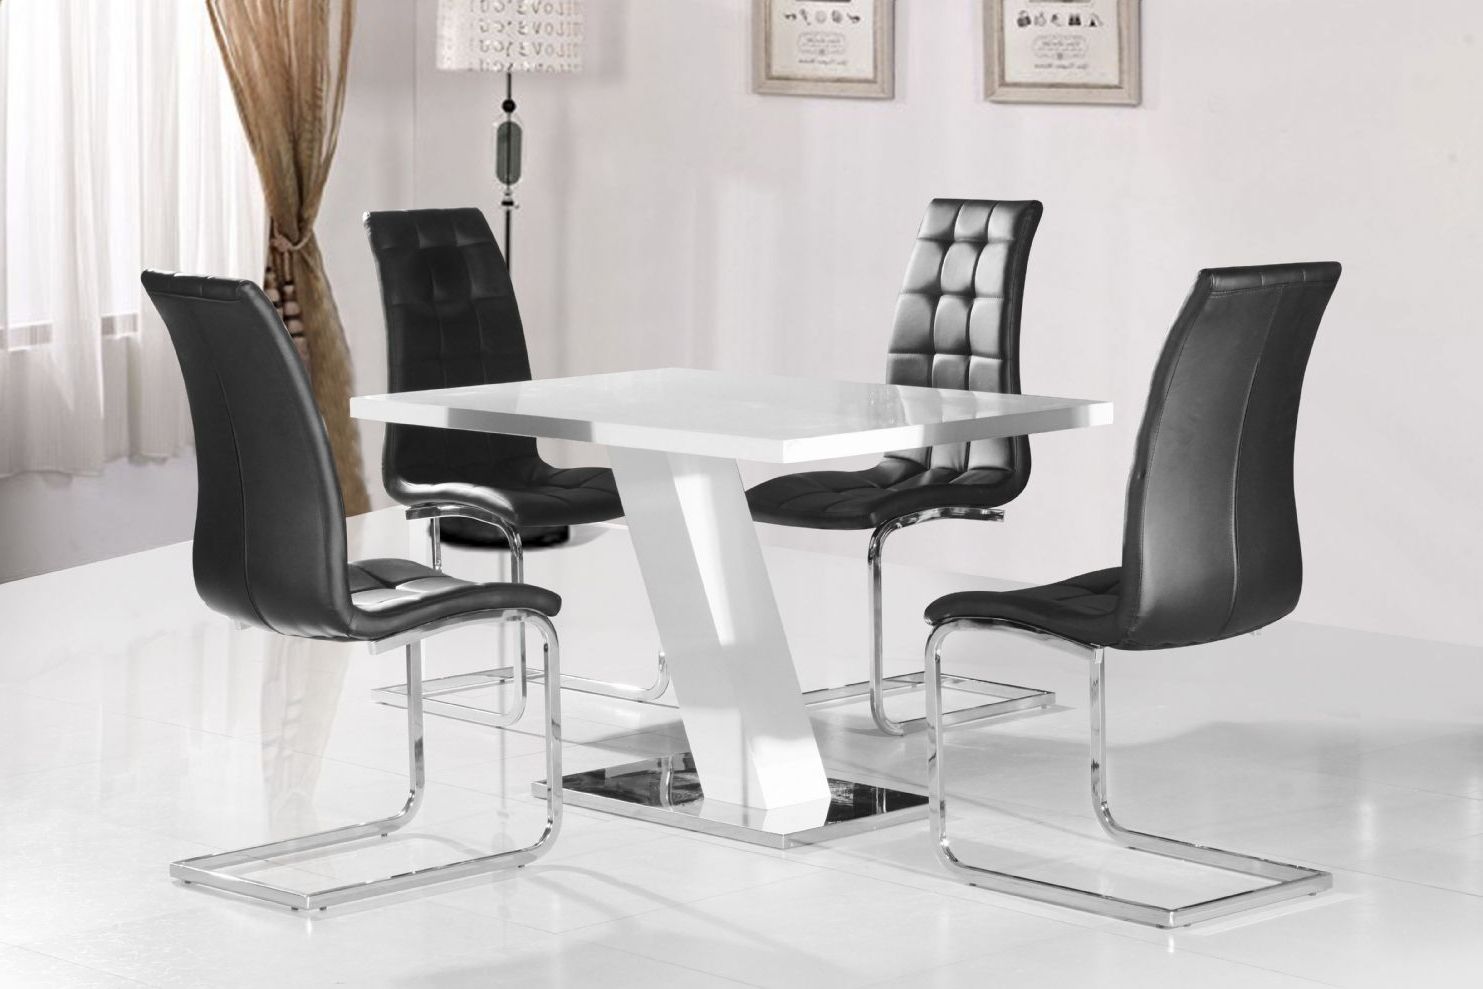 Grazia White High Gloss Contemporary Designer 120 Cm Compact Dining With Regard To Latest Black High Gloss Dining Tables (View 15 of 25)